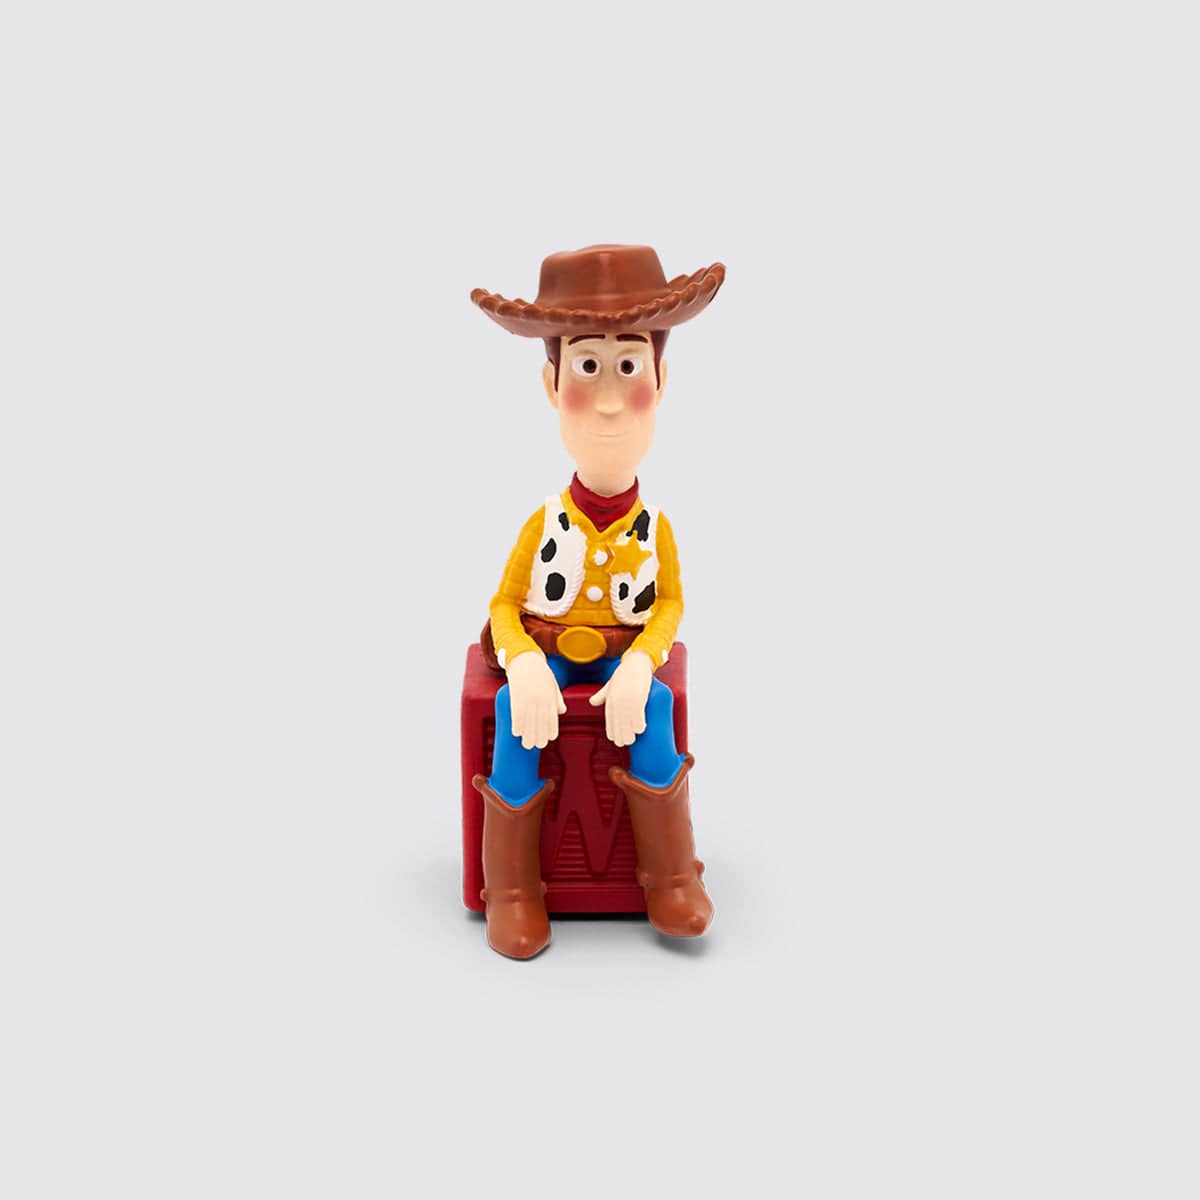 Anyone else love toy story 4 and feel super sad at the end? : r/Pixar